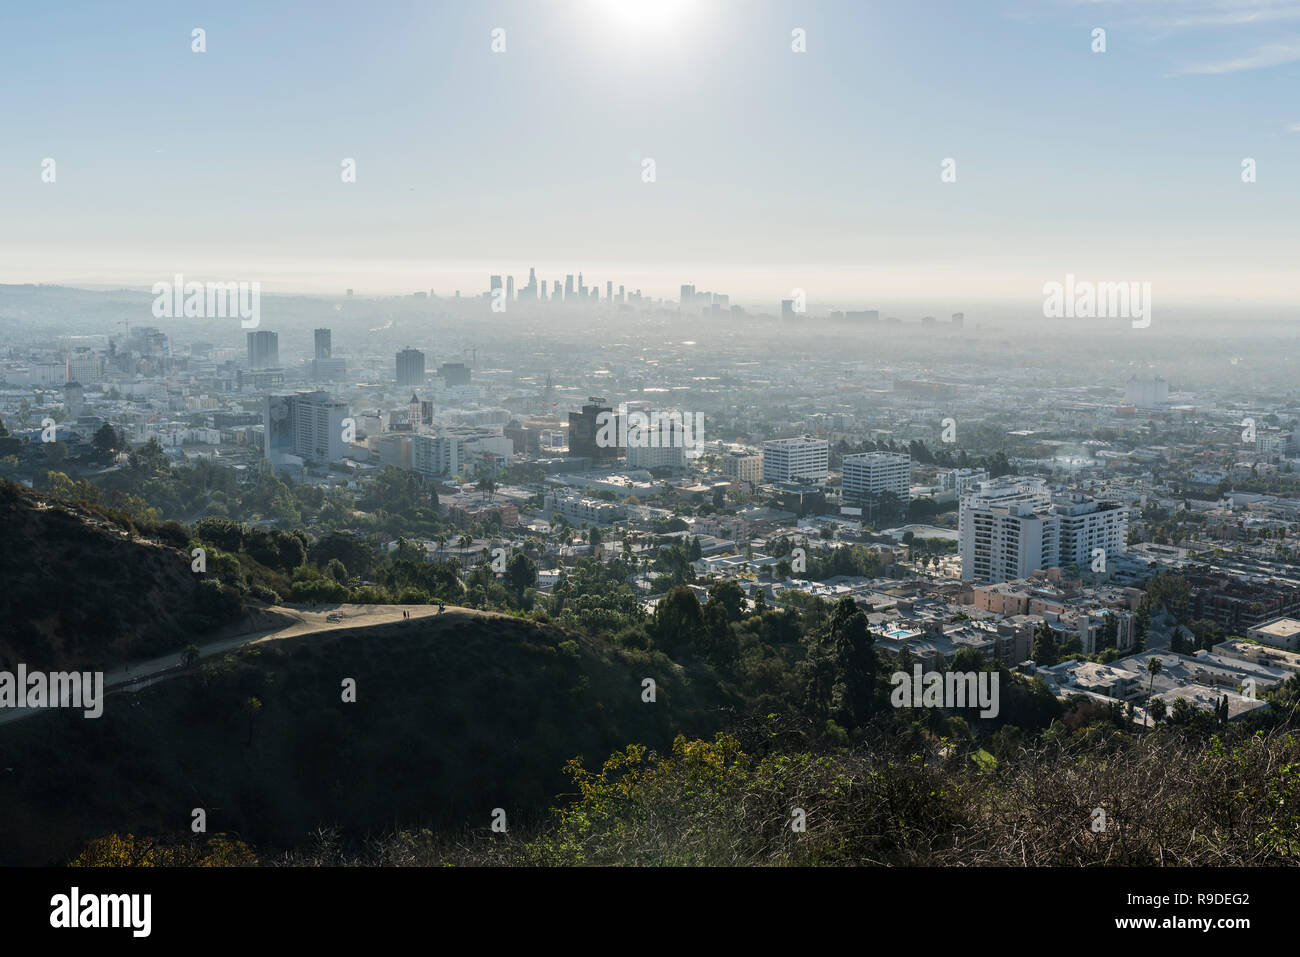 Los Angeles, California, USA - December 16, 2018:  Cityscape view of Runyon Canyon Park hiking trails, Hollywood and downtown LA. Stock Photo